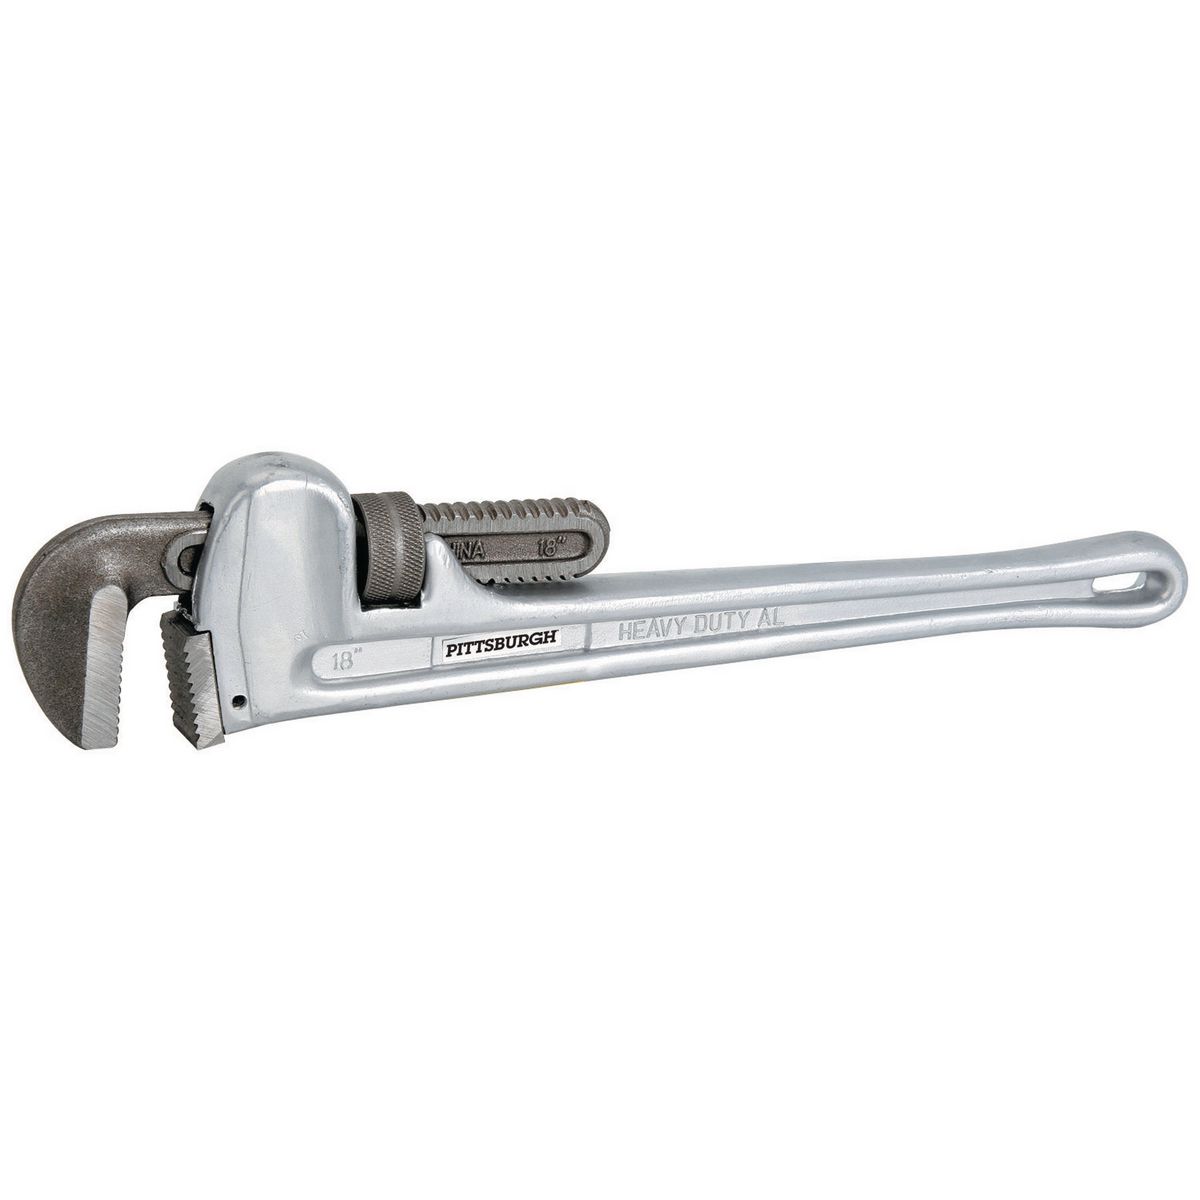 PITTSBURGH 18 in. Aluminum Pipe Wrench - Item 63652 / 39605 / 60530